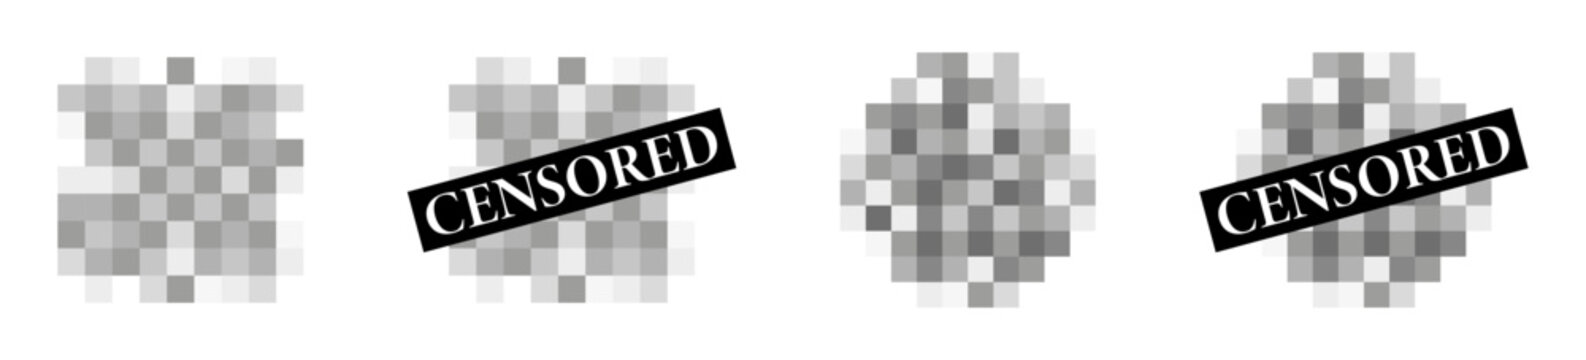 Censored vector icons. Censored signs collection. Censure pixel symbol.